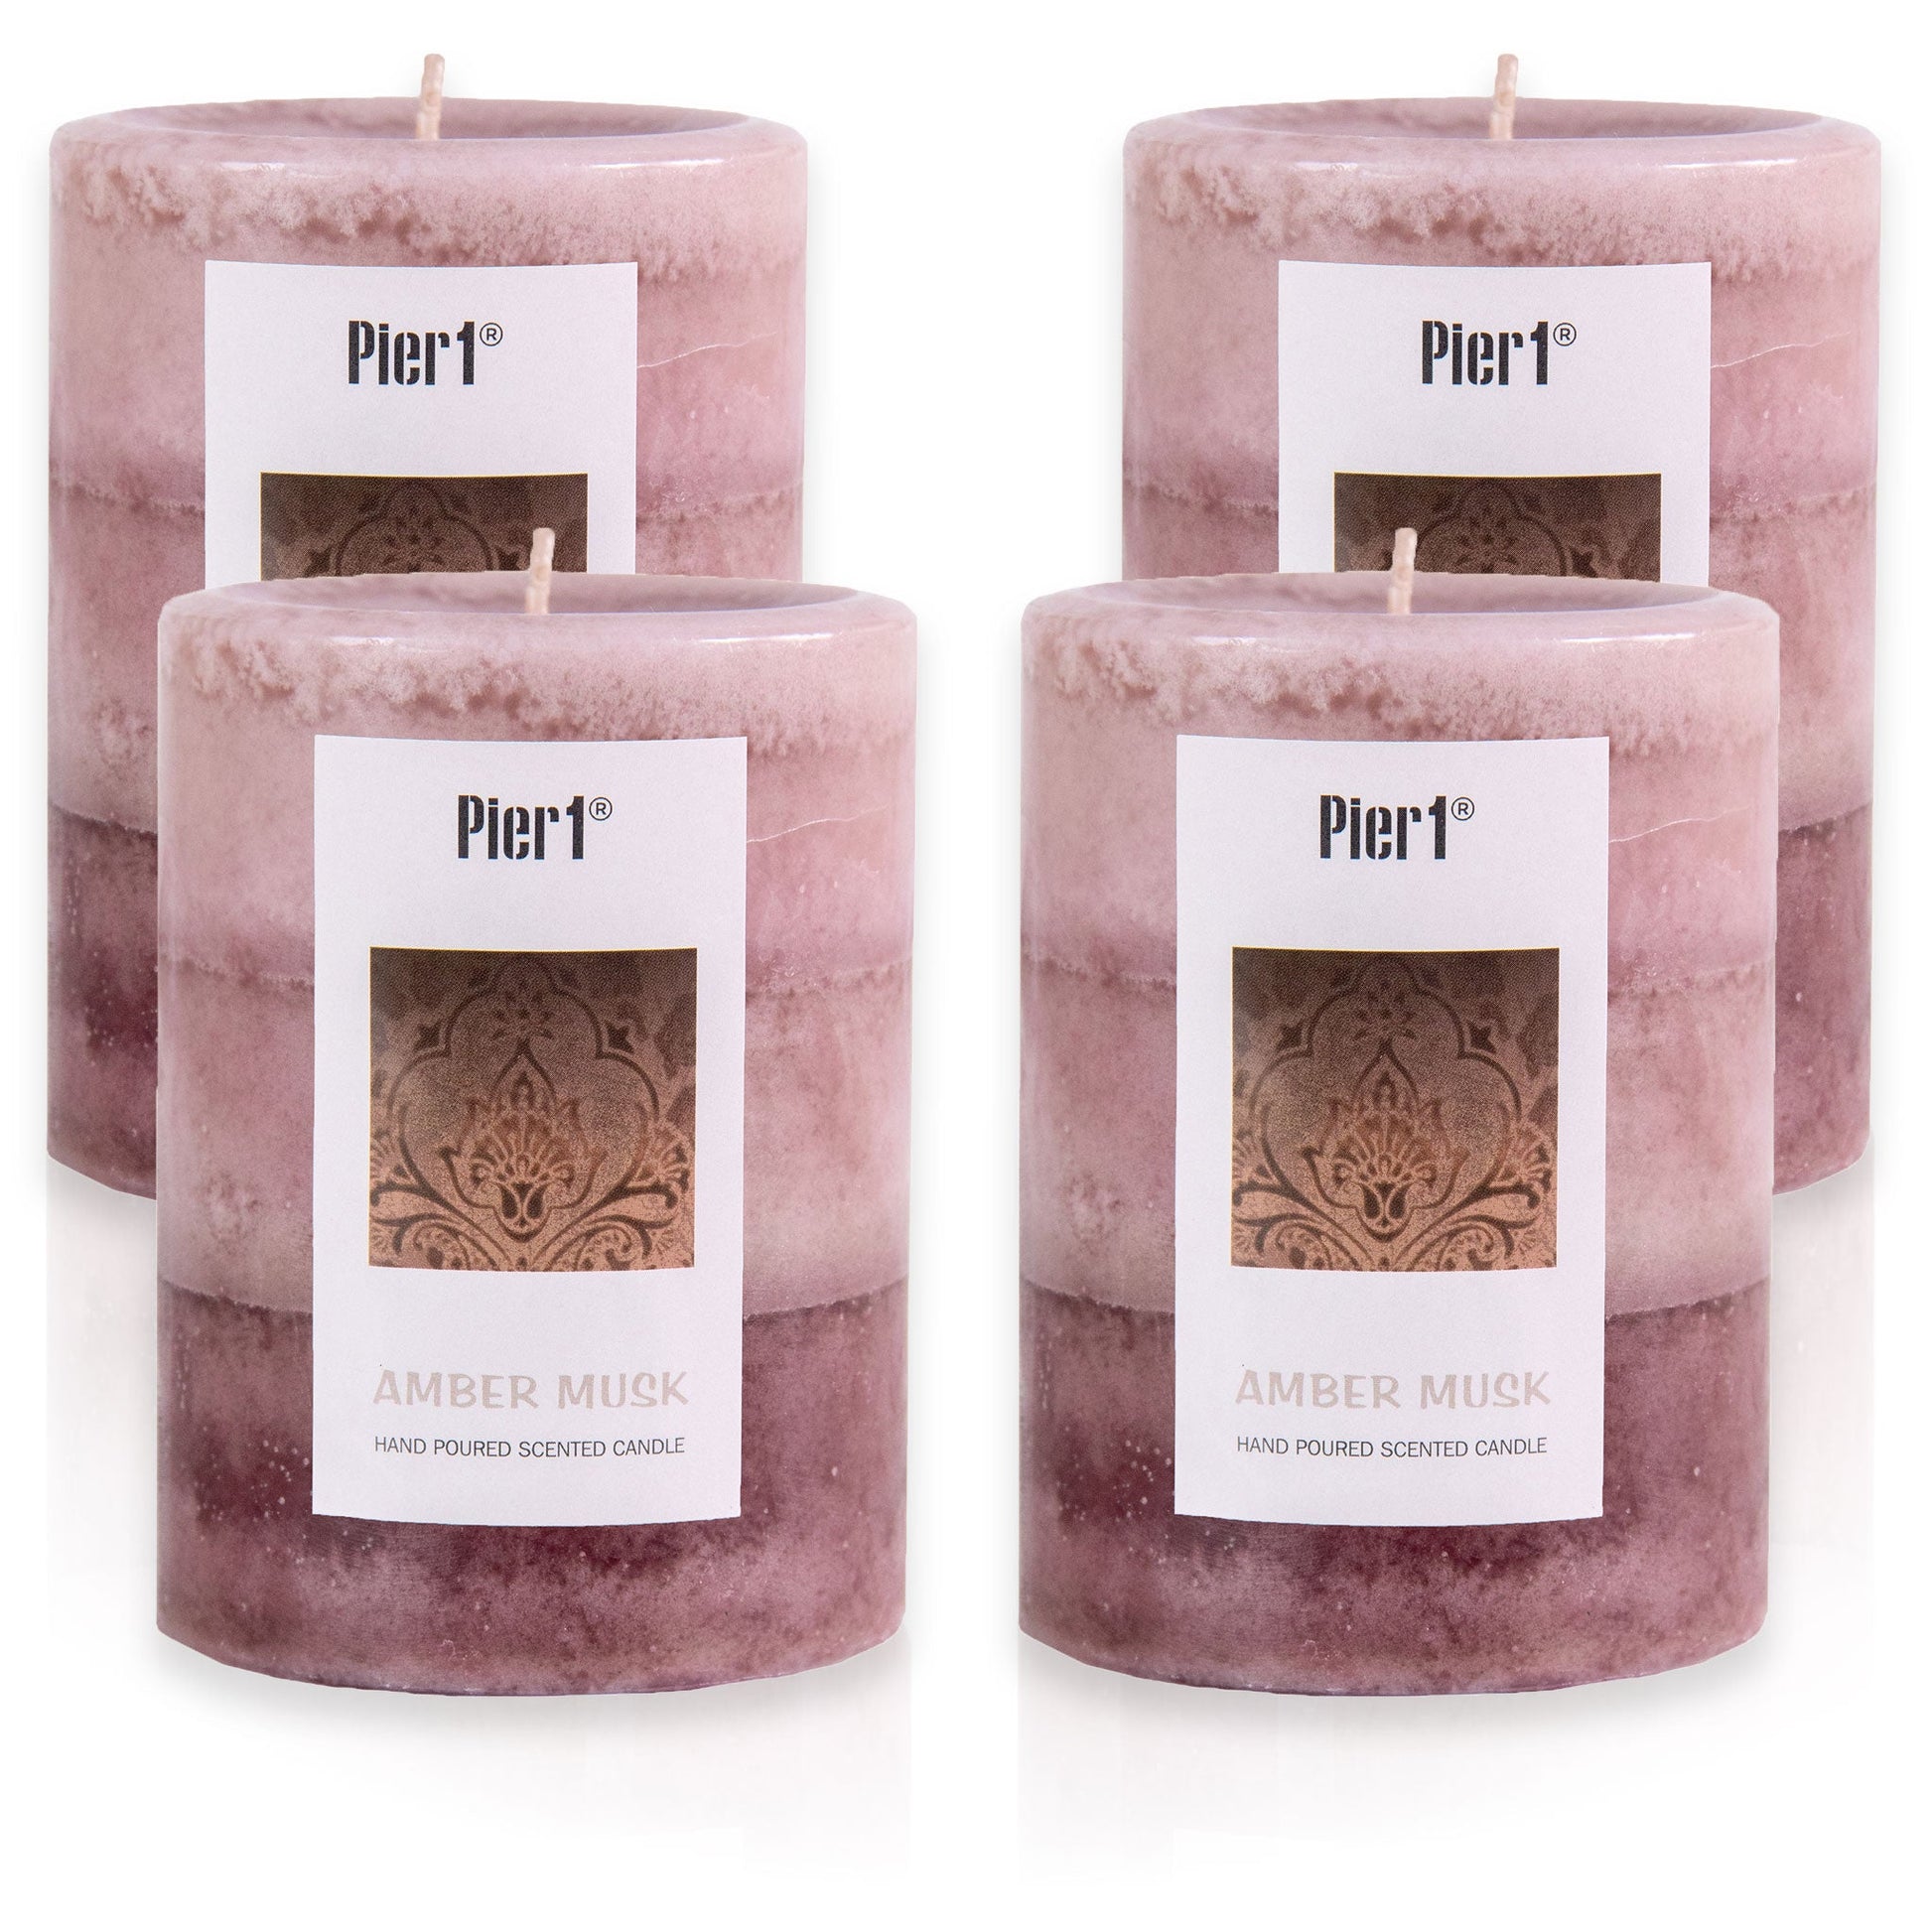 Pier 1 Amber Musk 3x4 Layered Set of 4 Pillar Candles - The Home Resolution